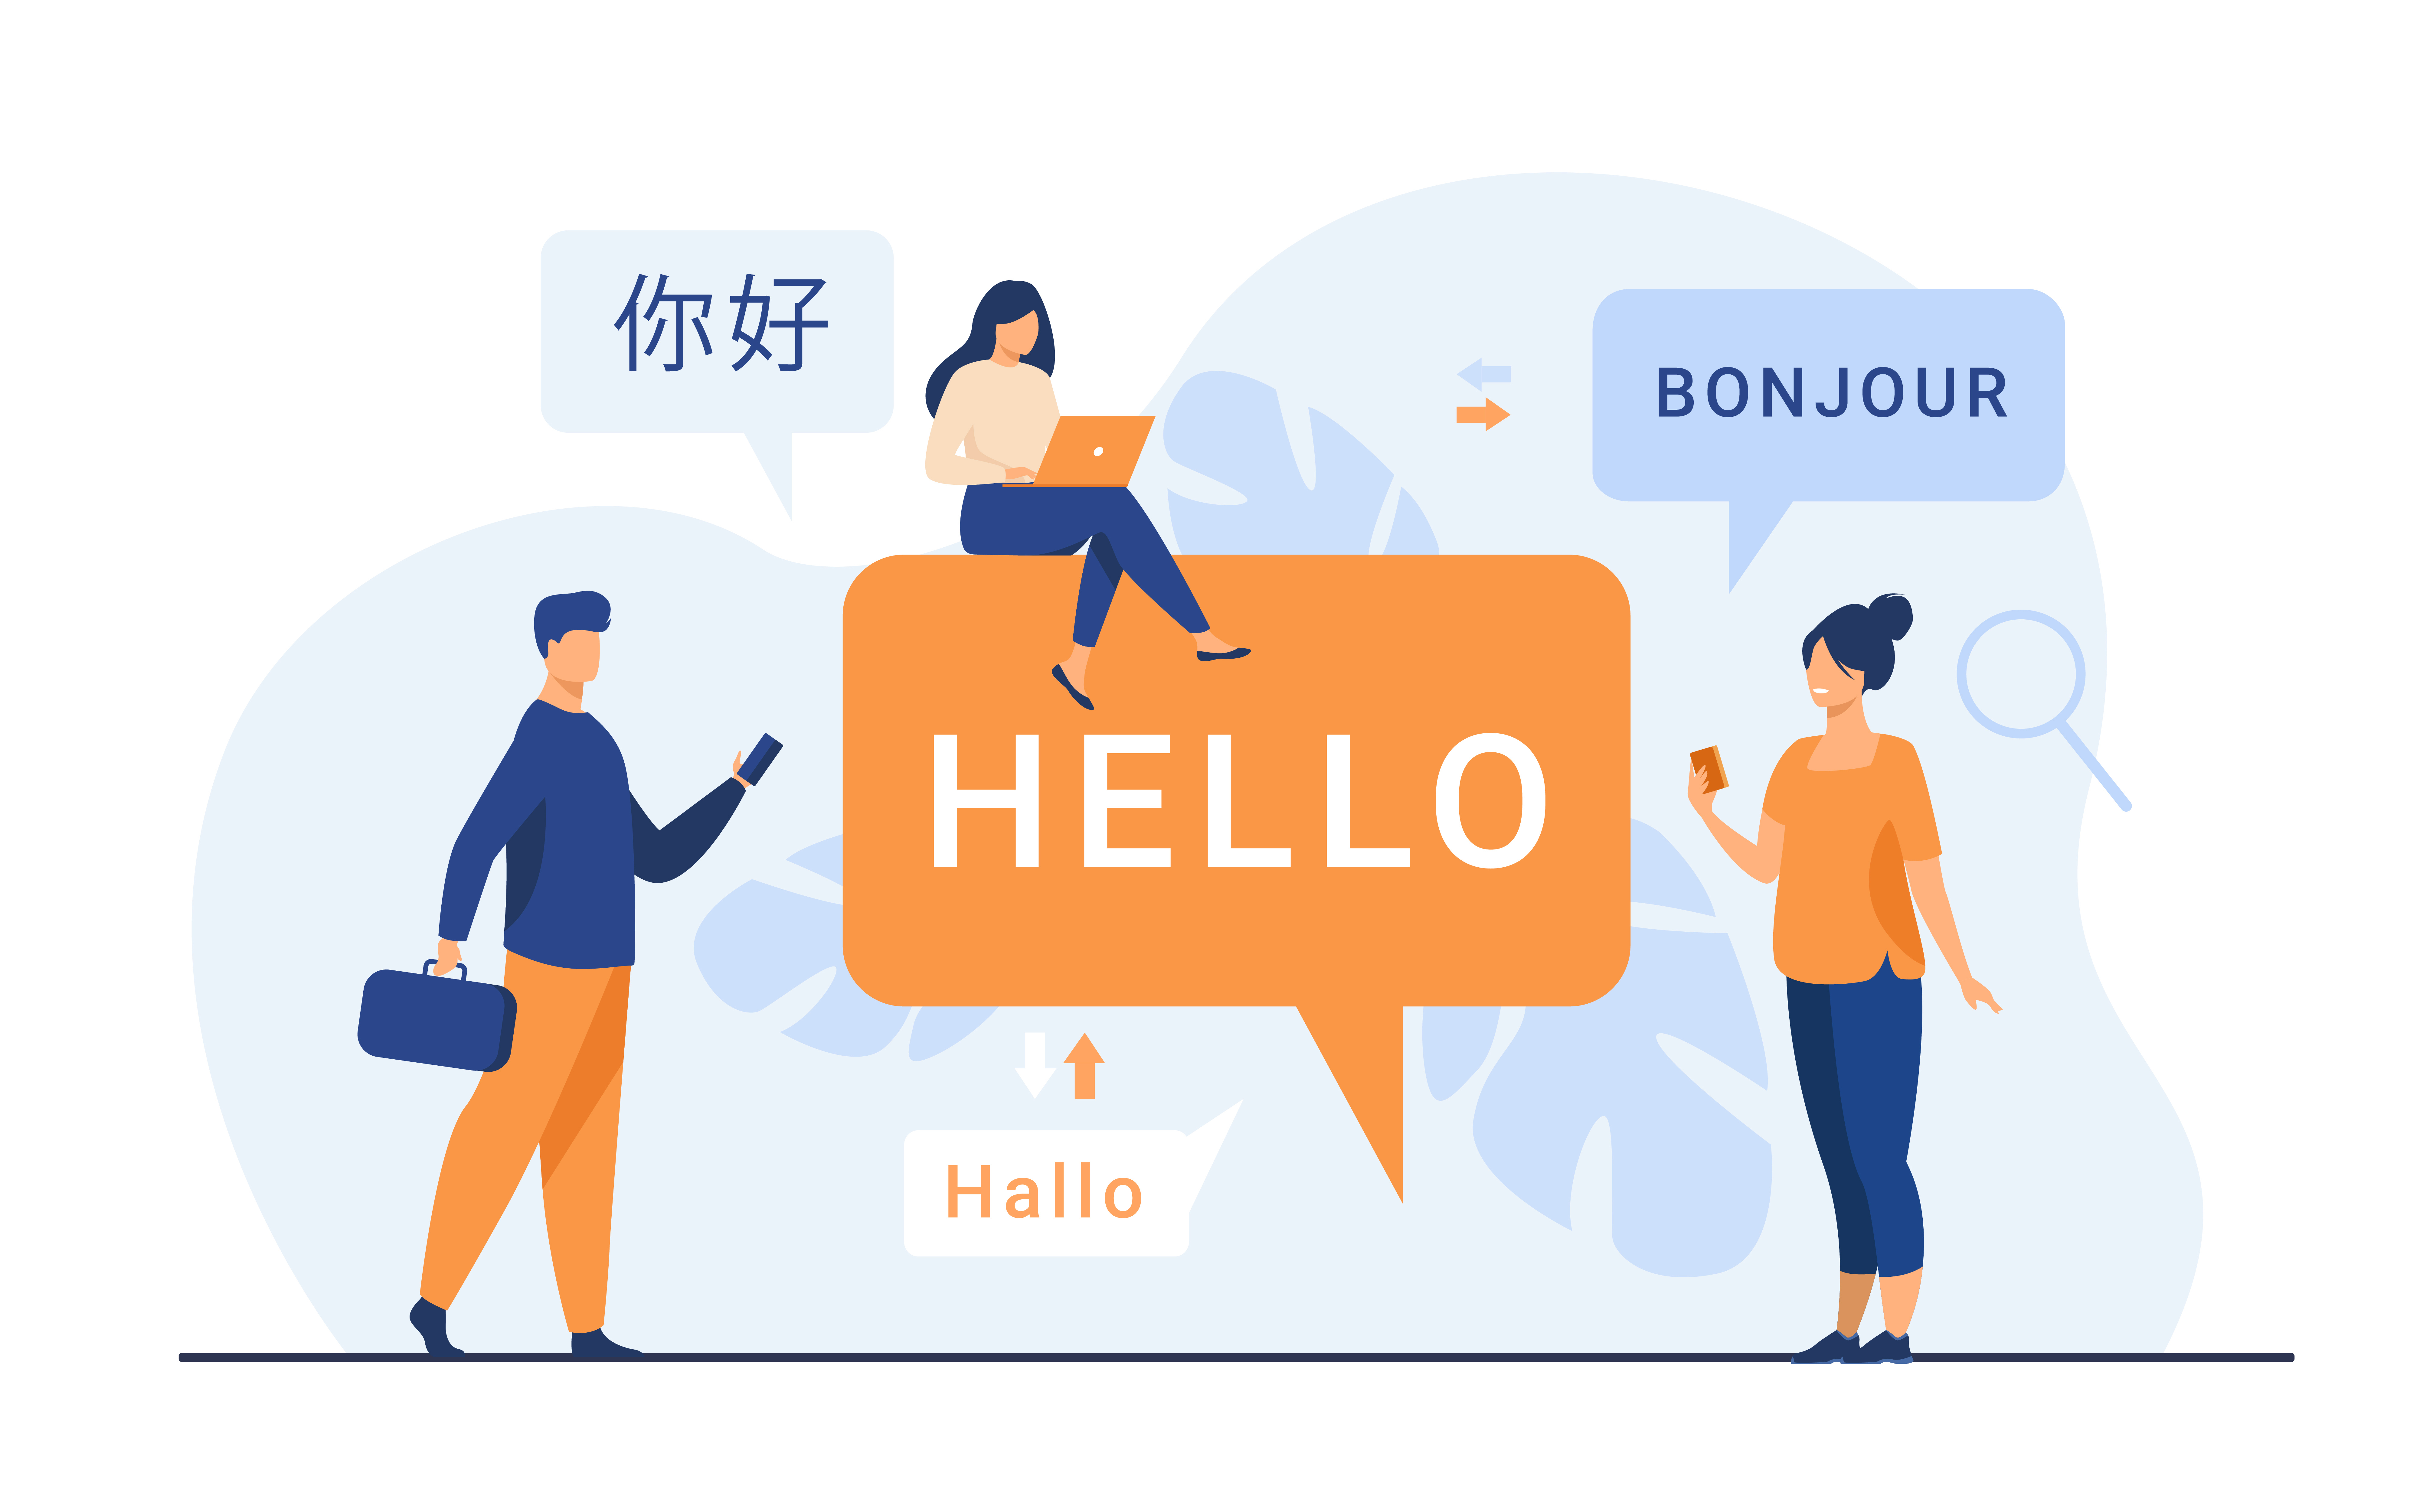 People using online translation app, translating words from foreign languages with mobile service. Can be used for international communication, travel abroad, learning concept